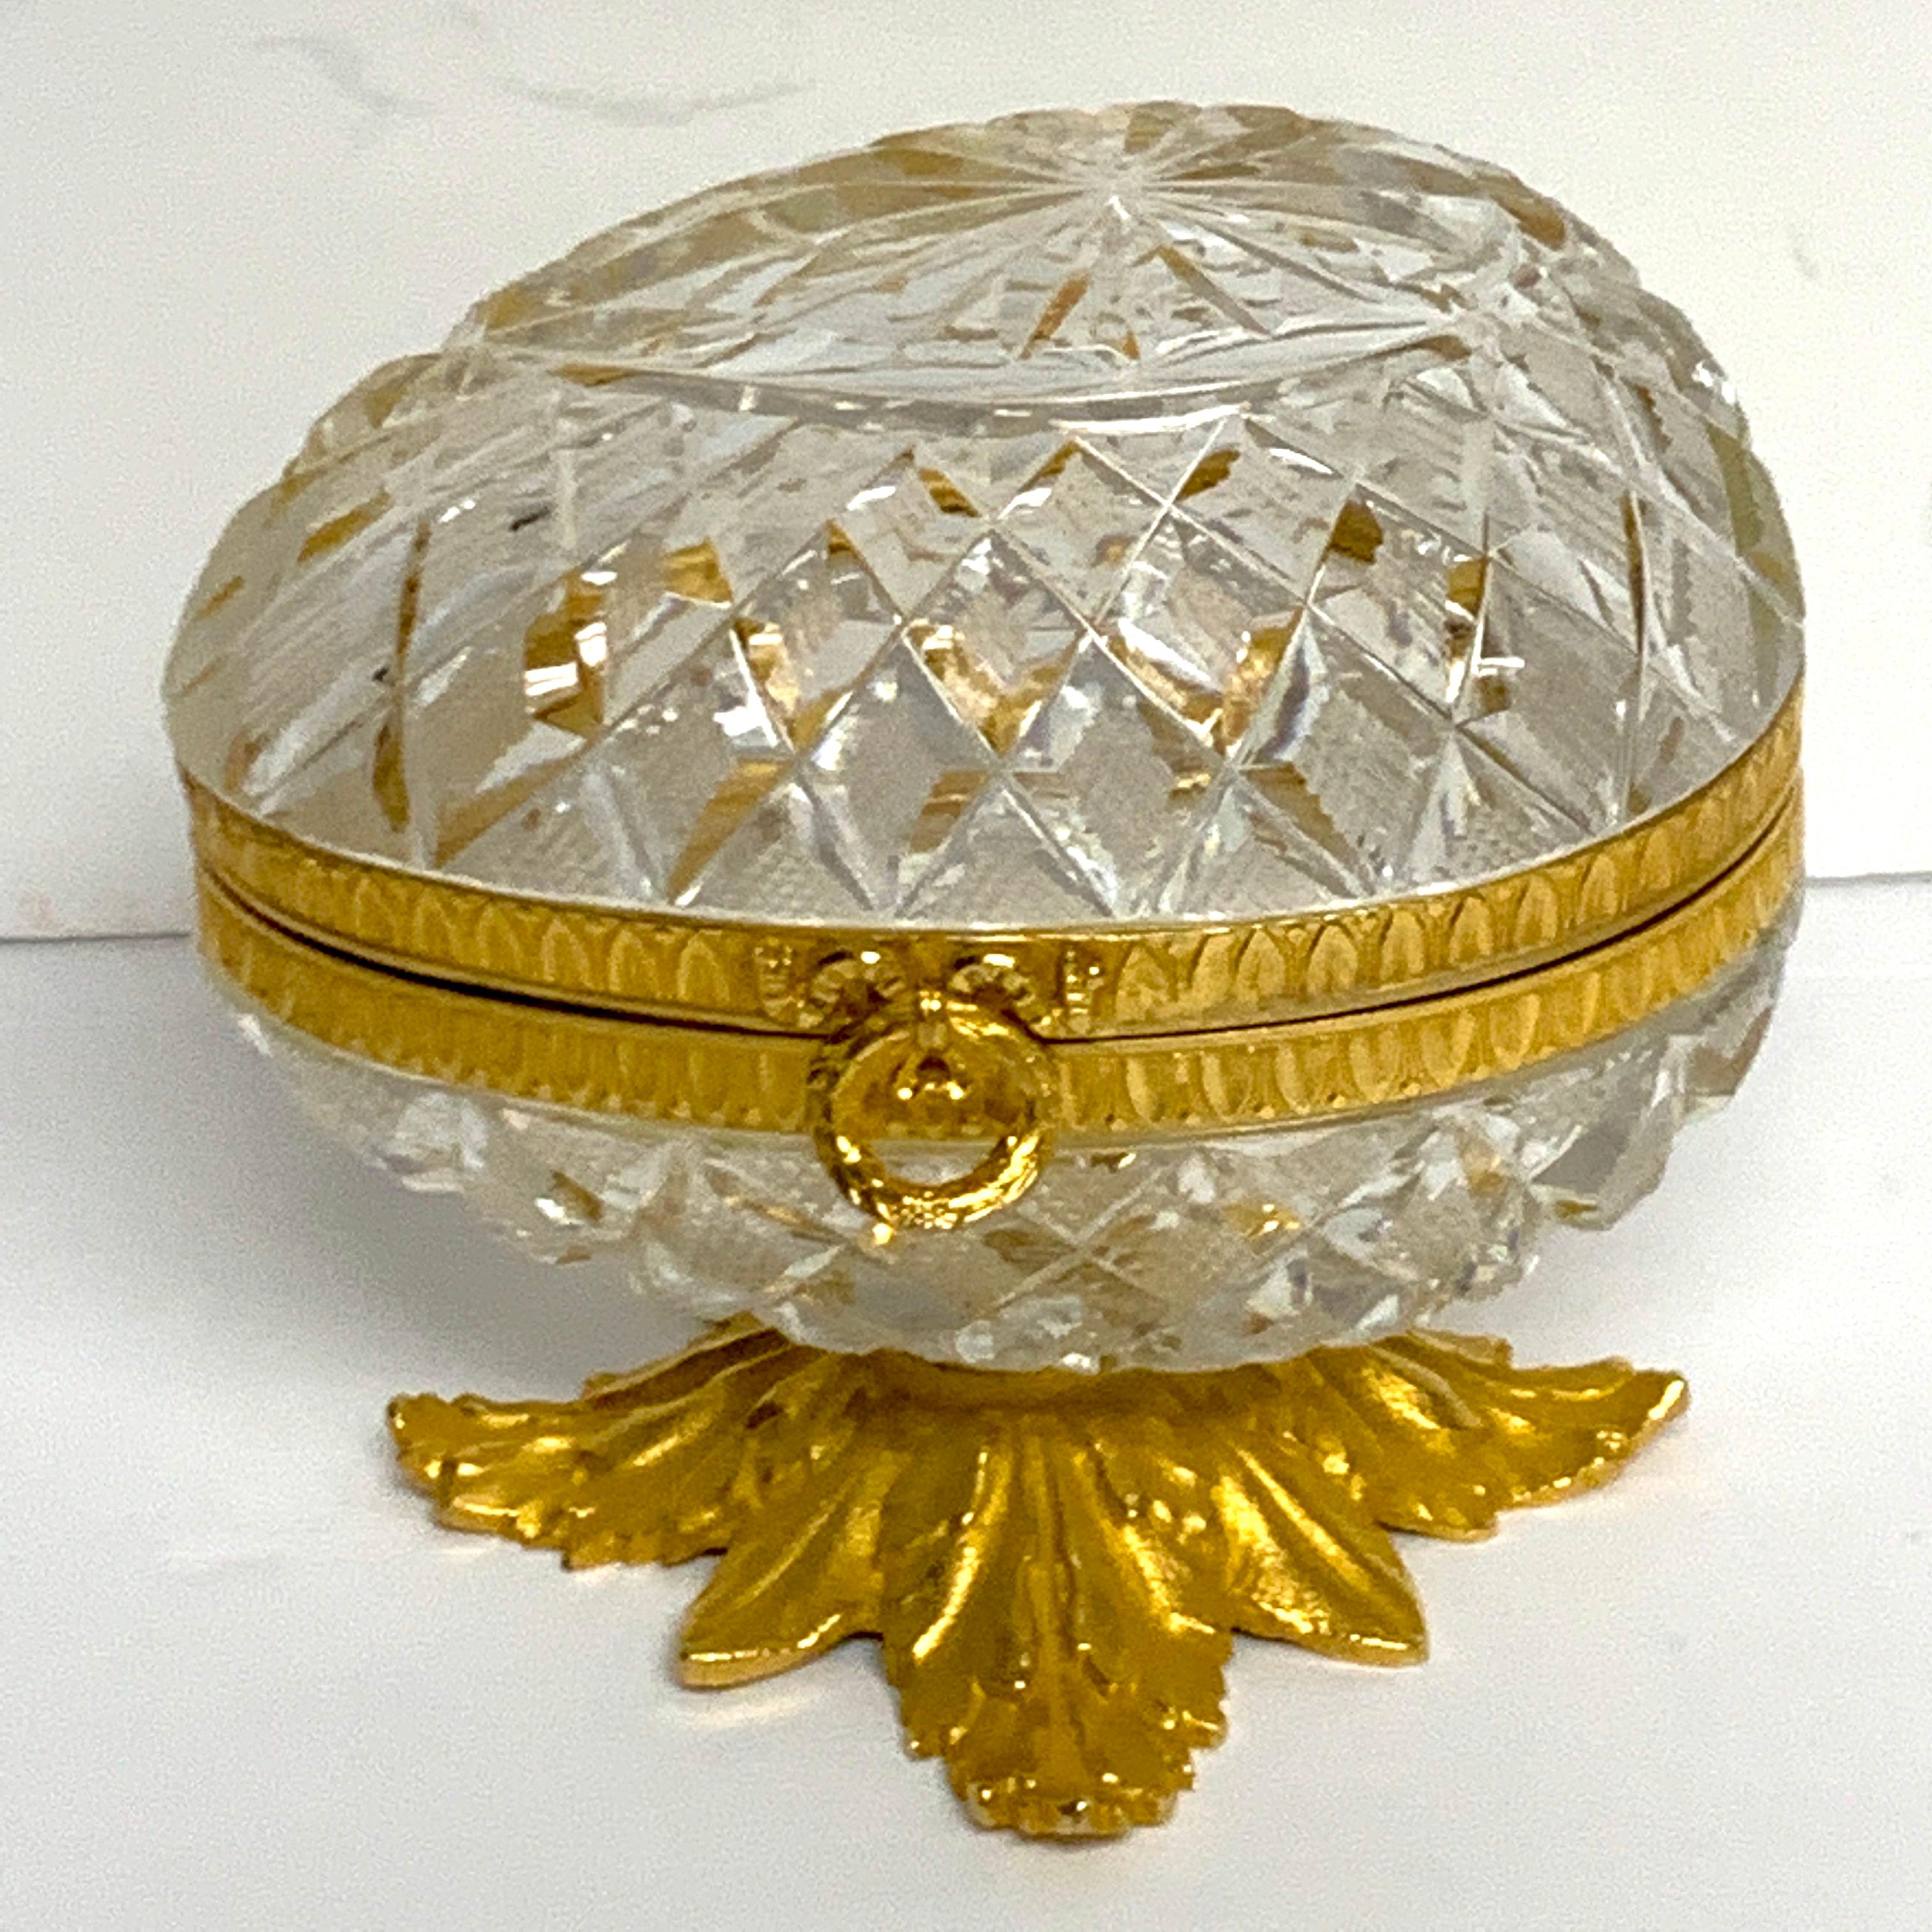 Baccarat style cut glass and ormolu egg motif box, unusual shape. No flaws observed ready to place. Raised on a 3.5